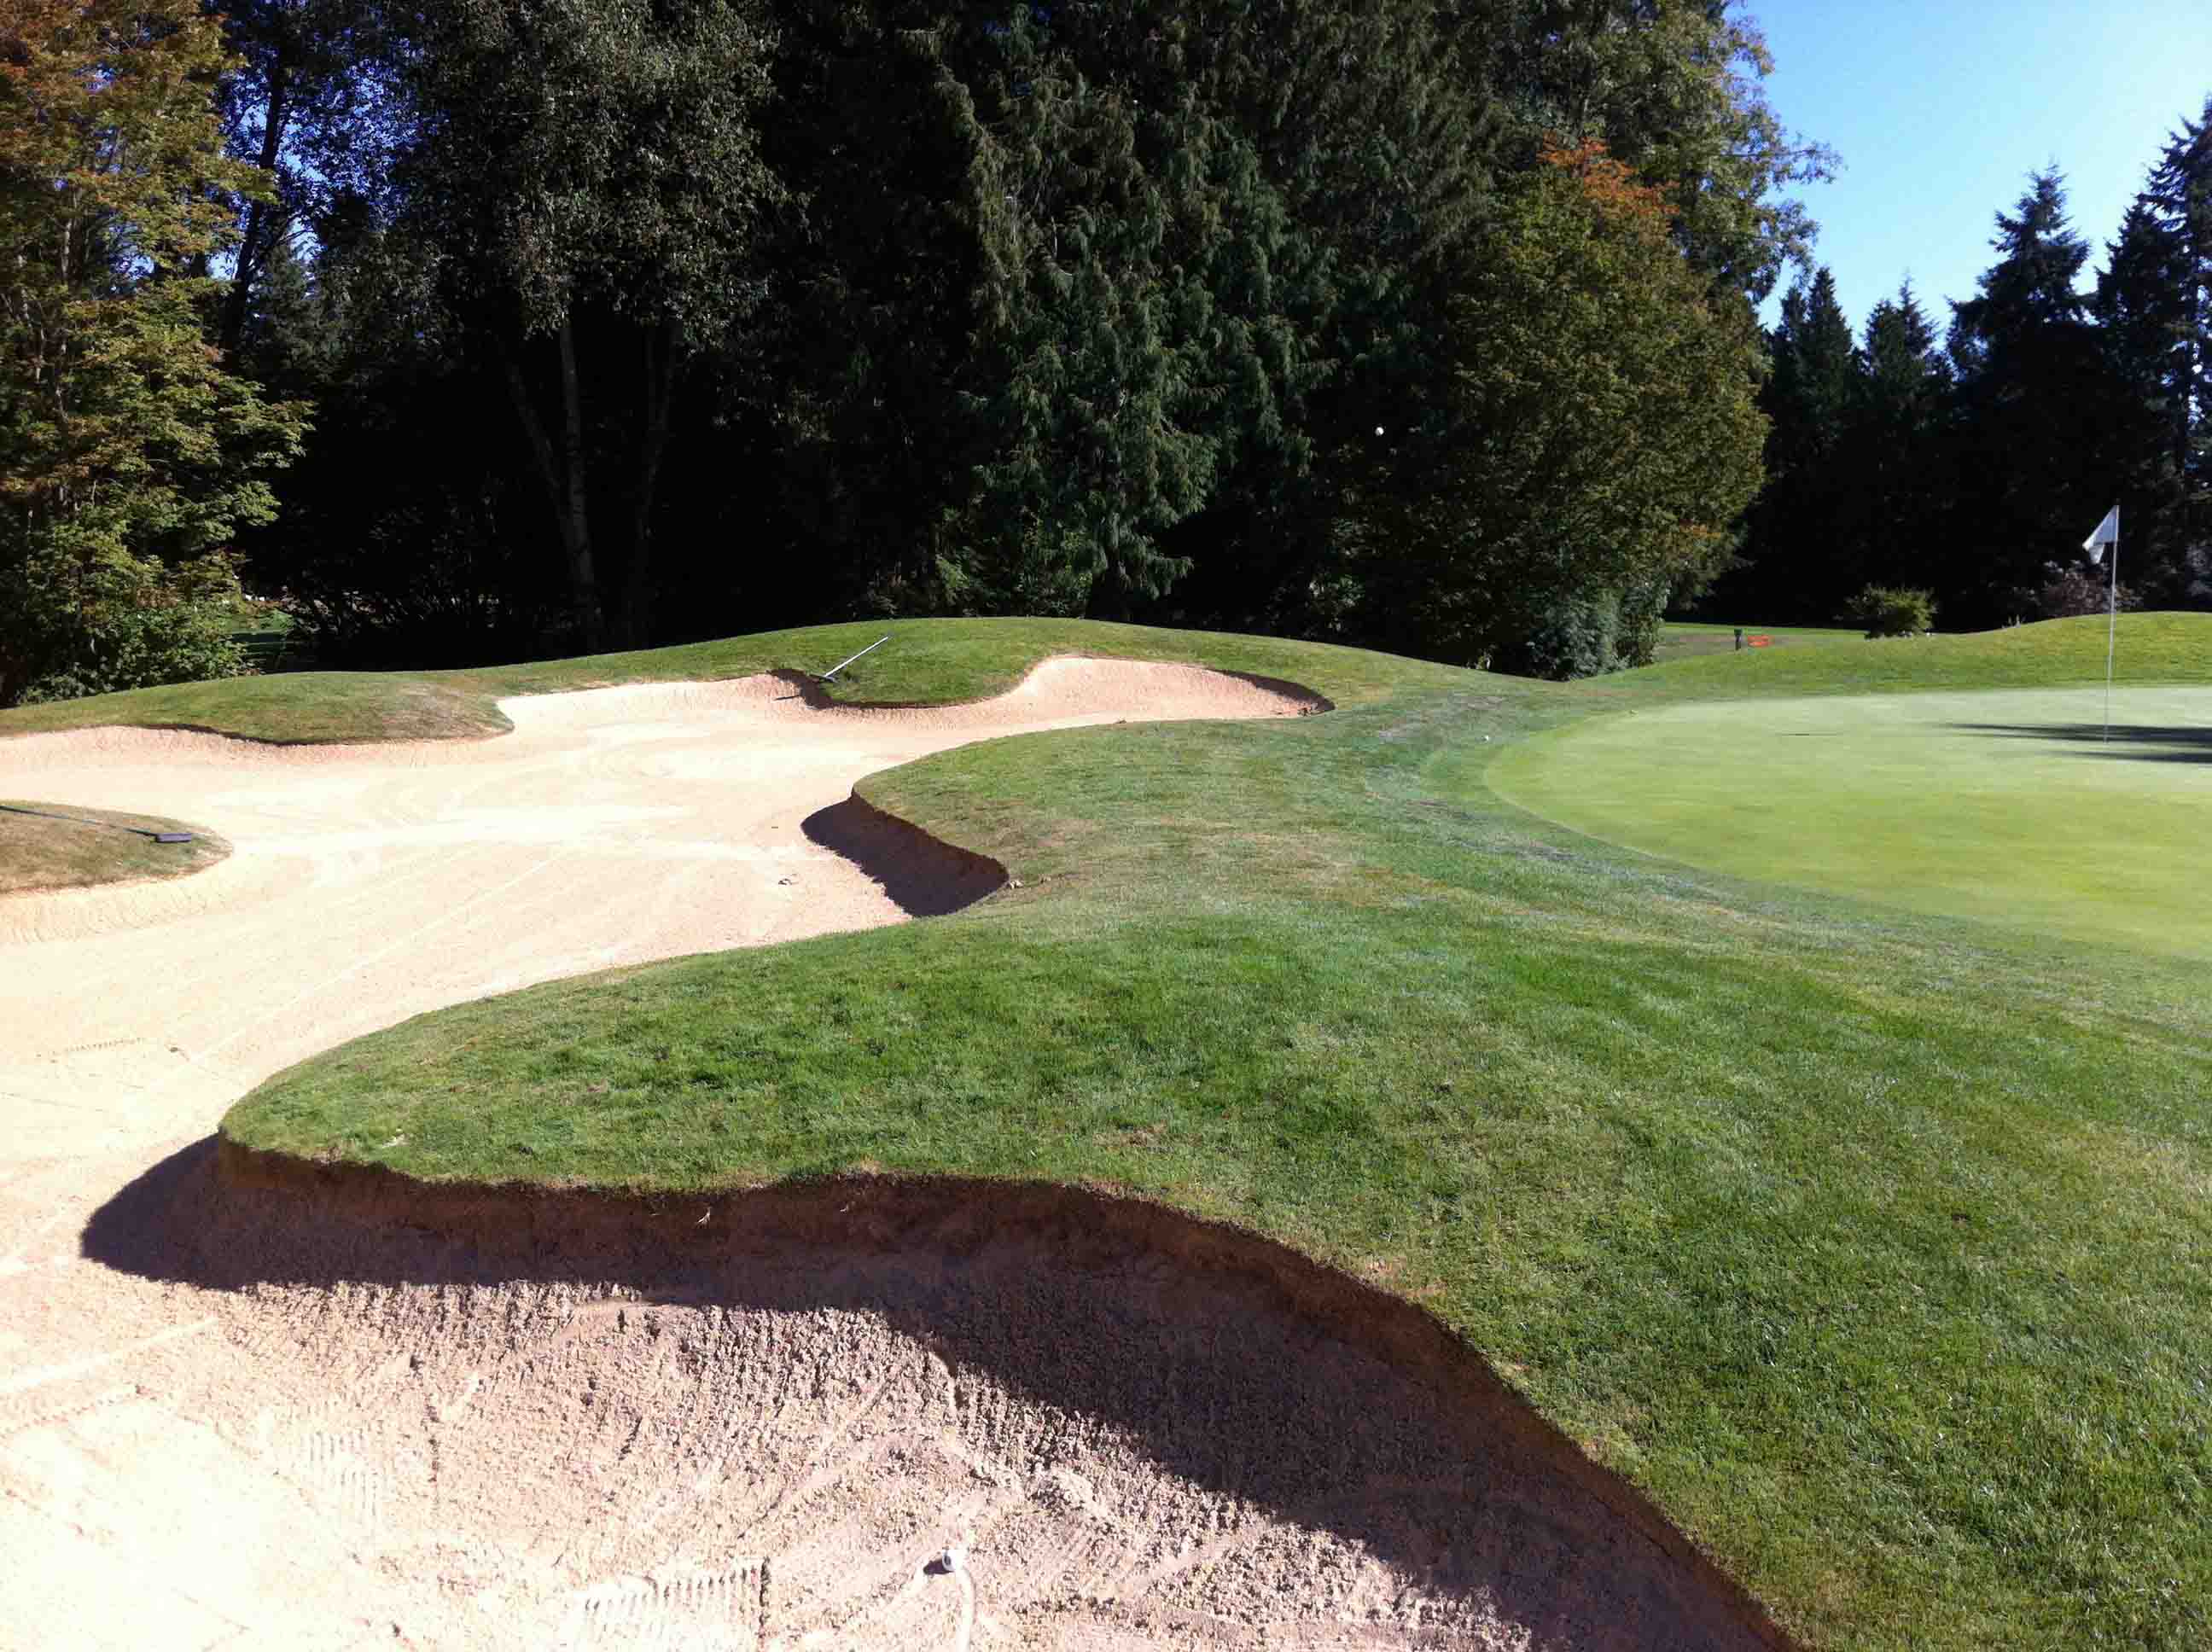 A Less Than Stellar Game of Golf at Shaughnessy